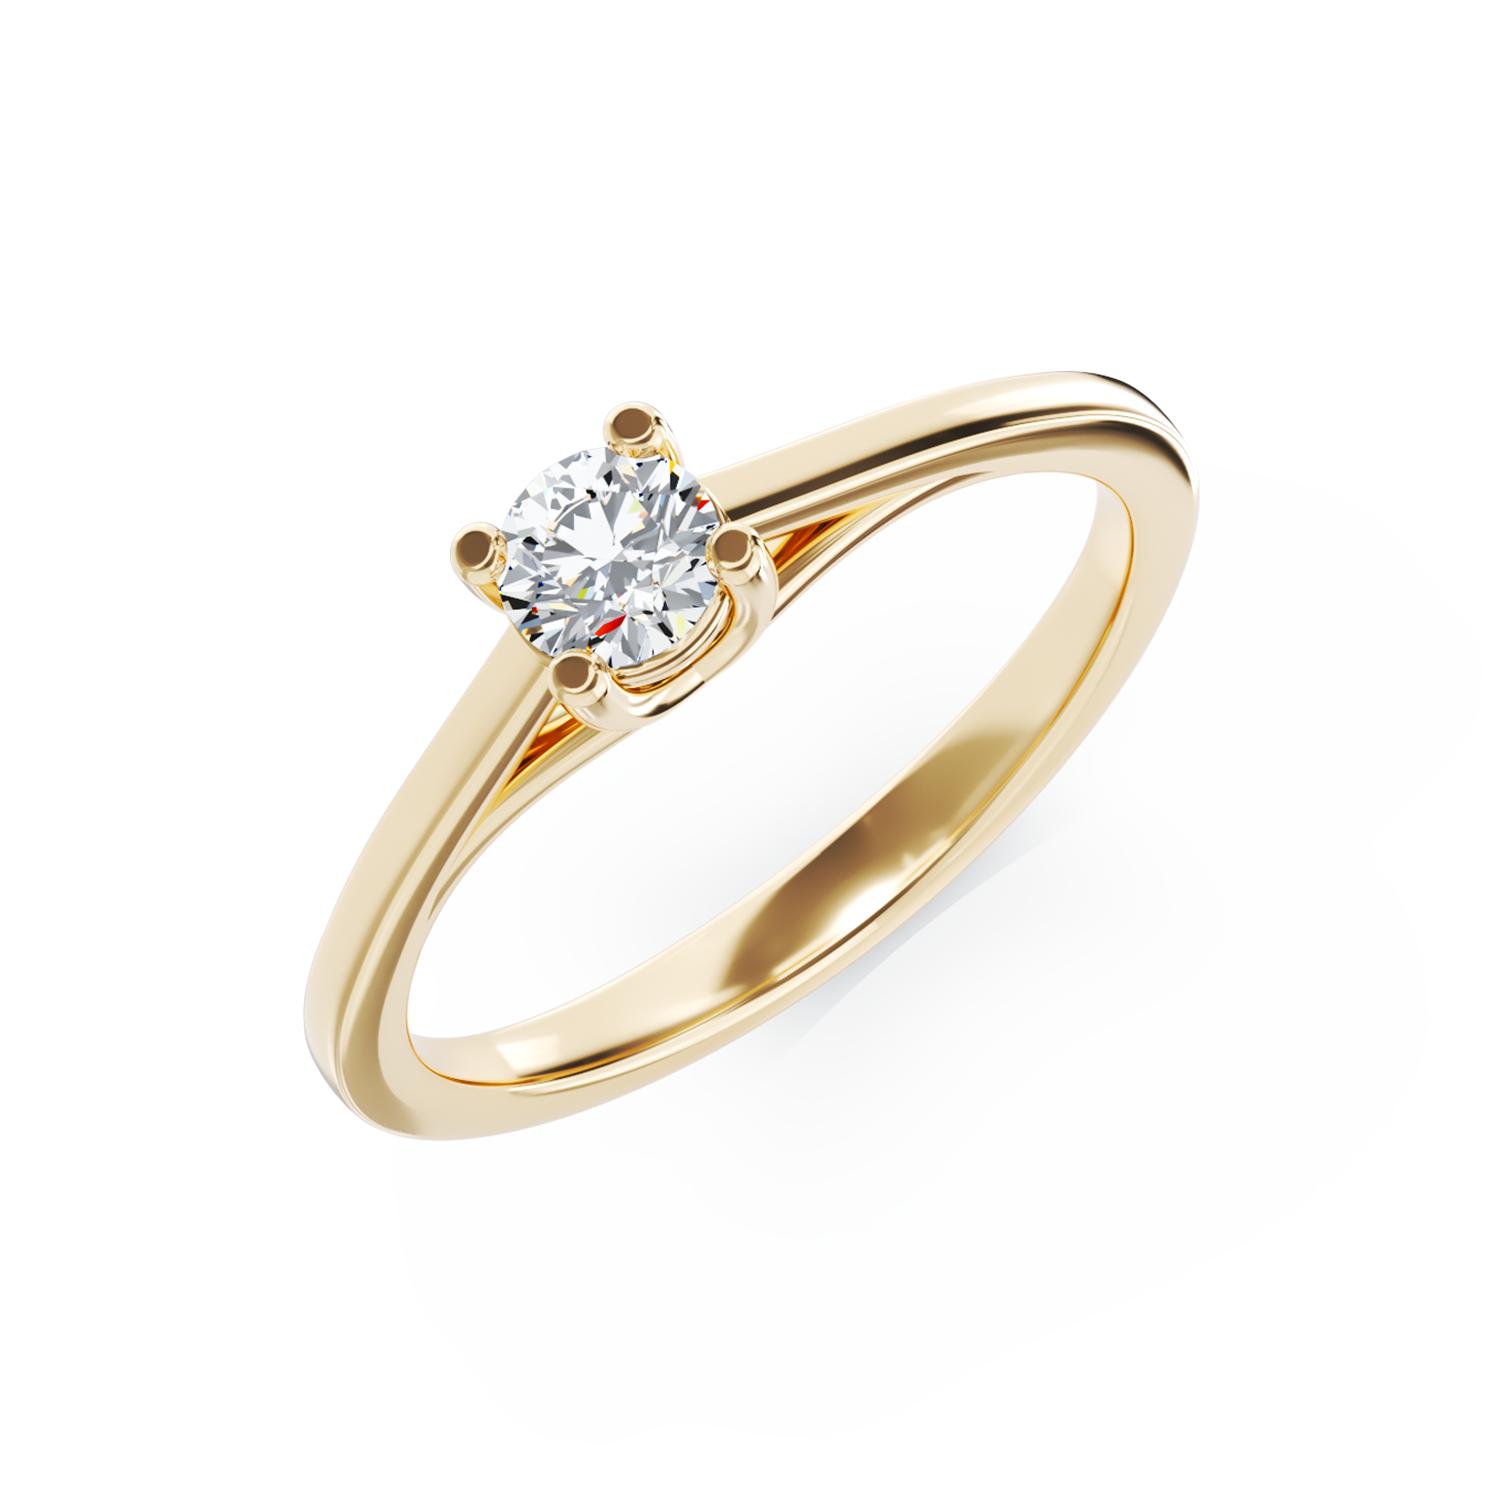 18K yellow gold engagement ring with 0.25ct diamond